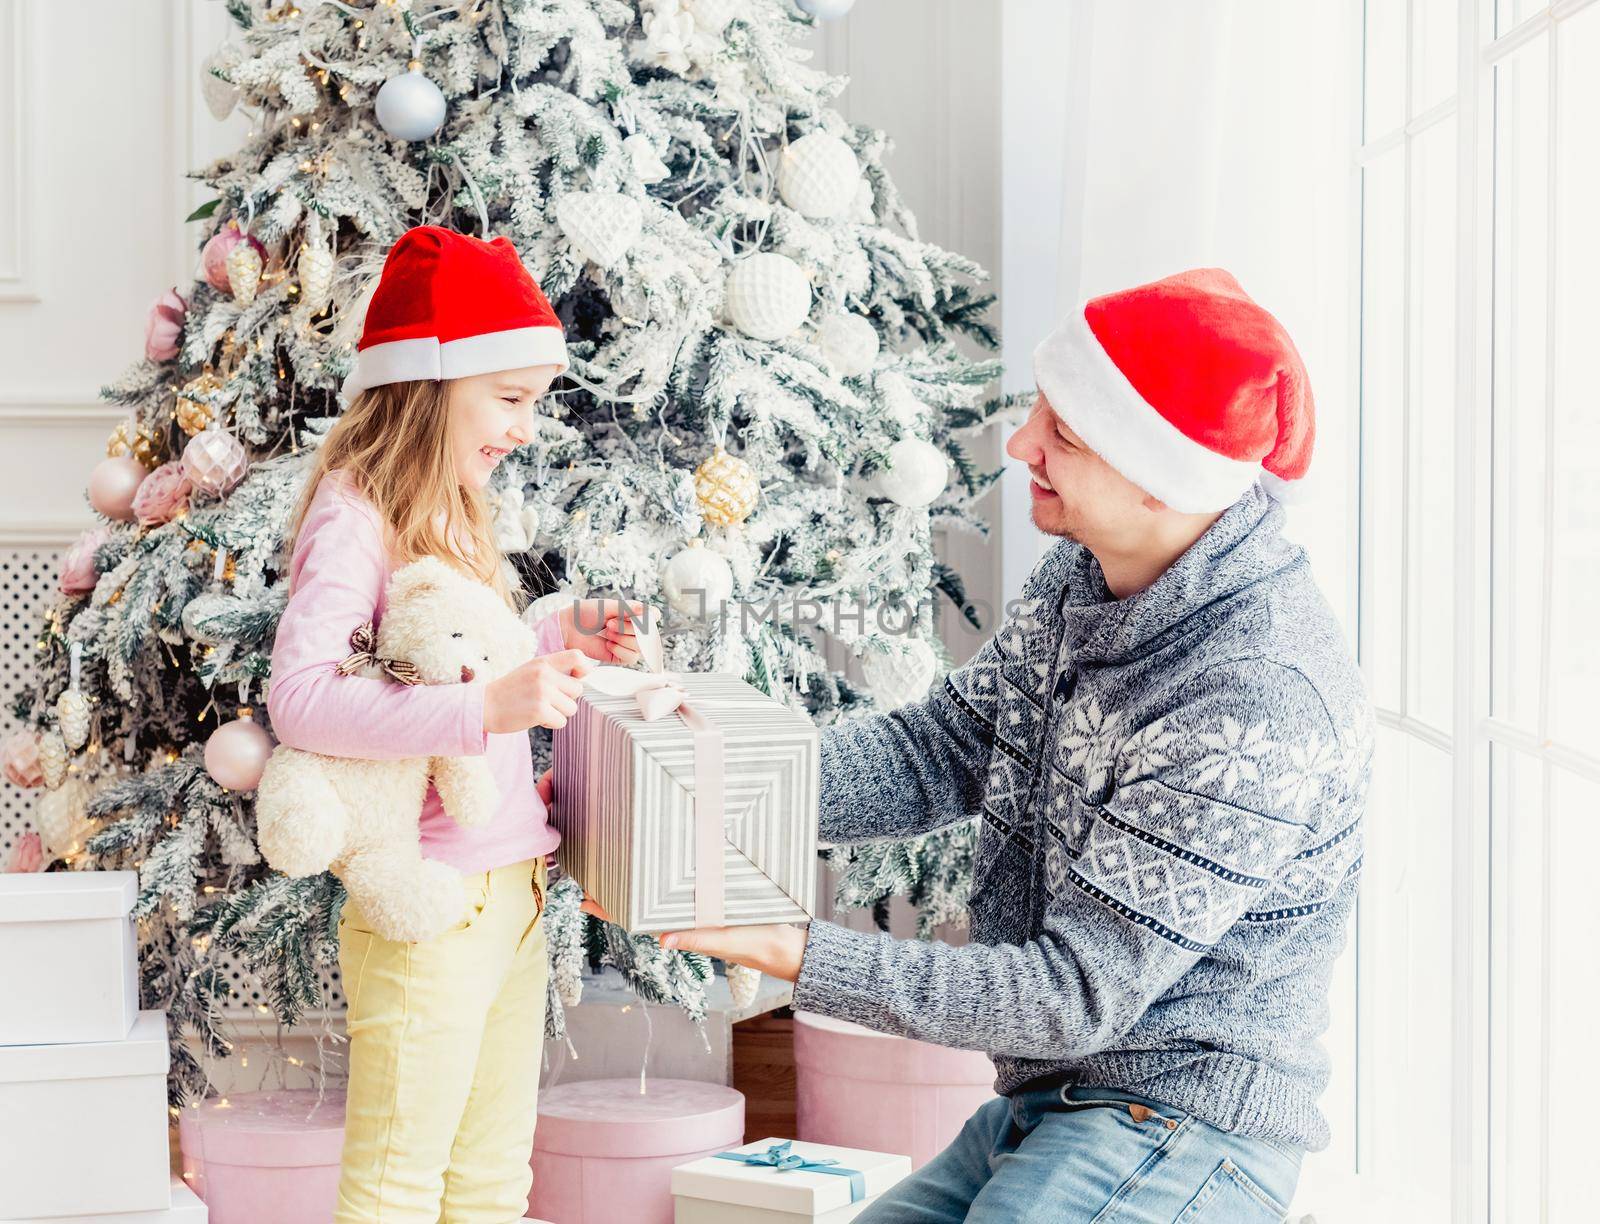 Smiling father giving little daughter christmas gift